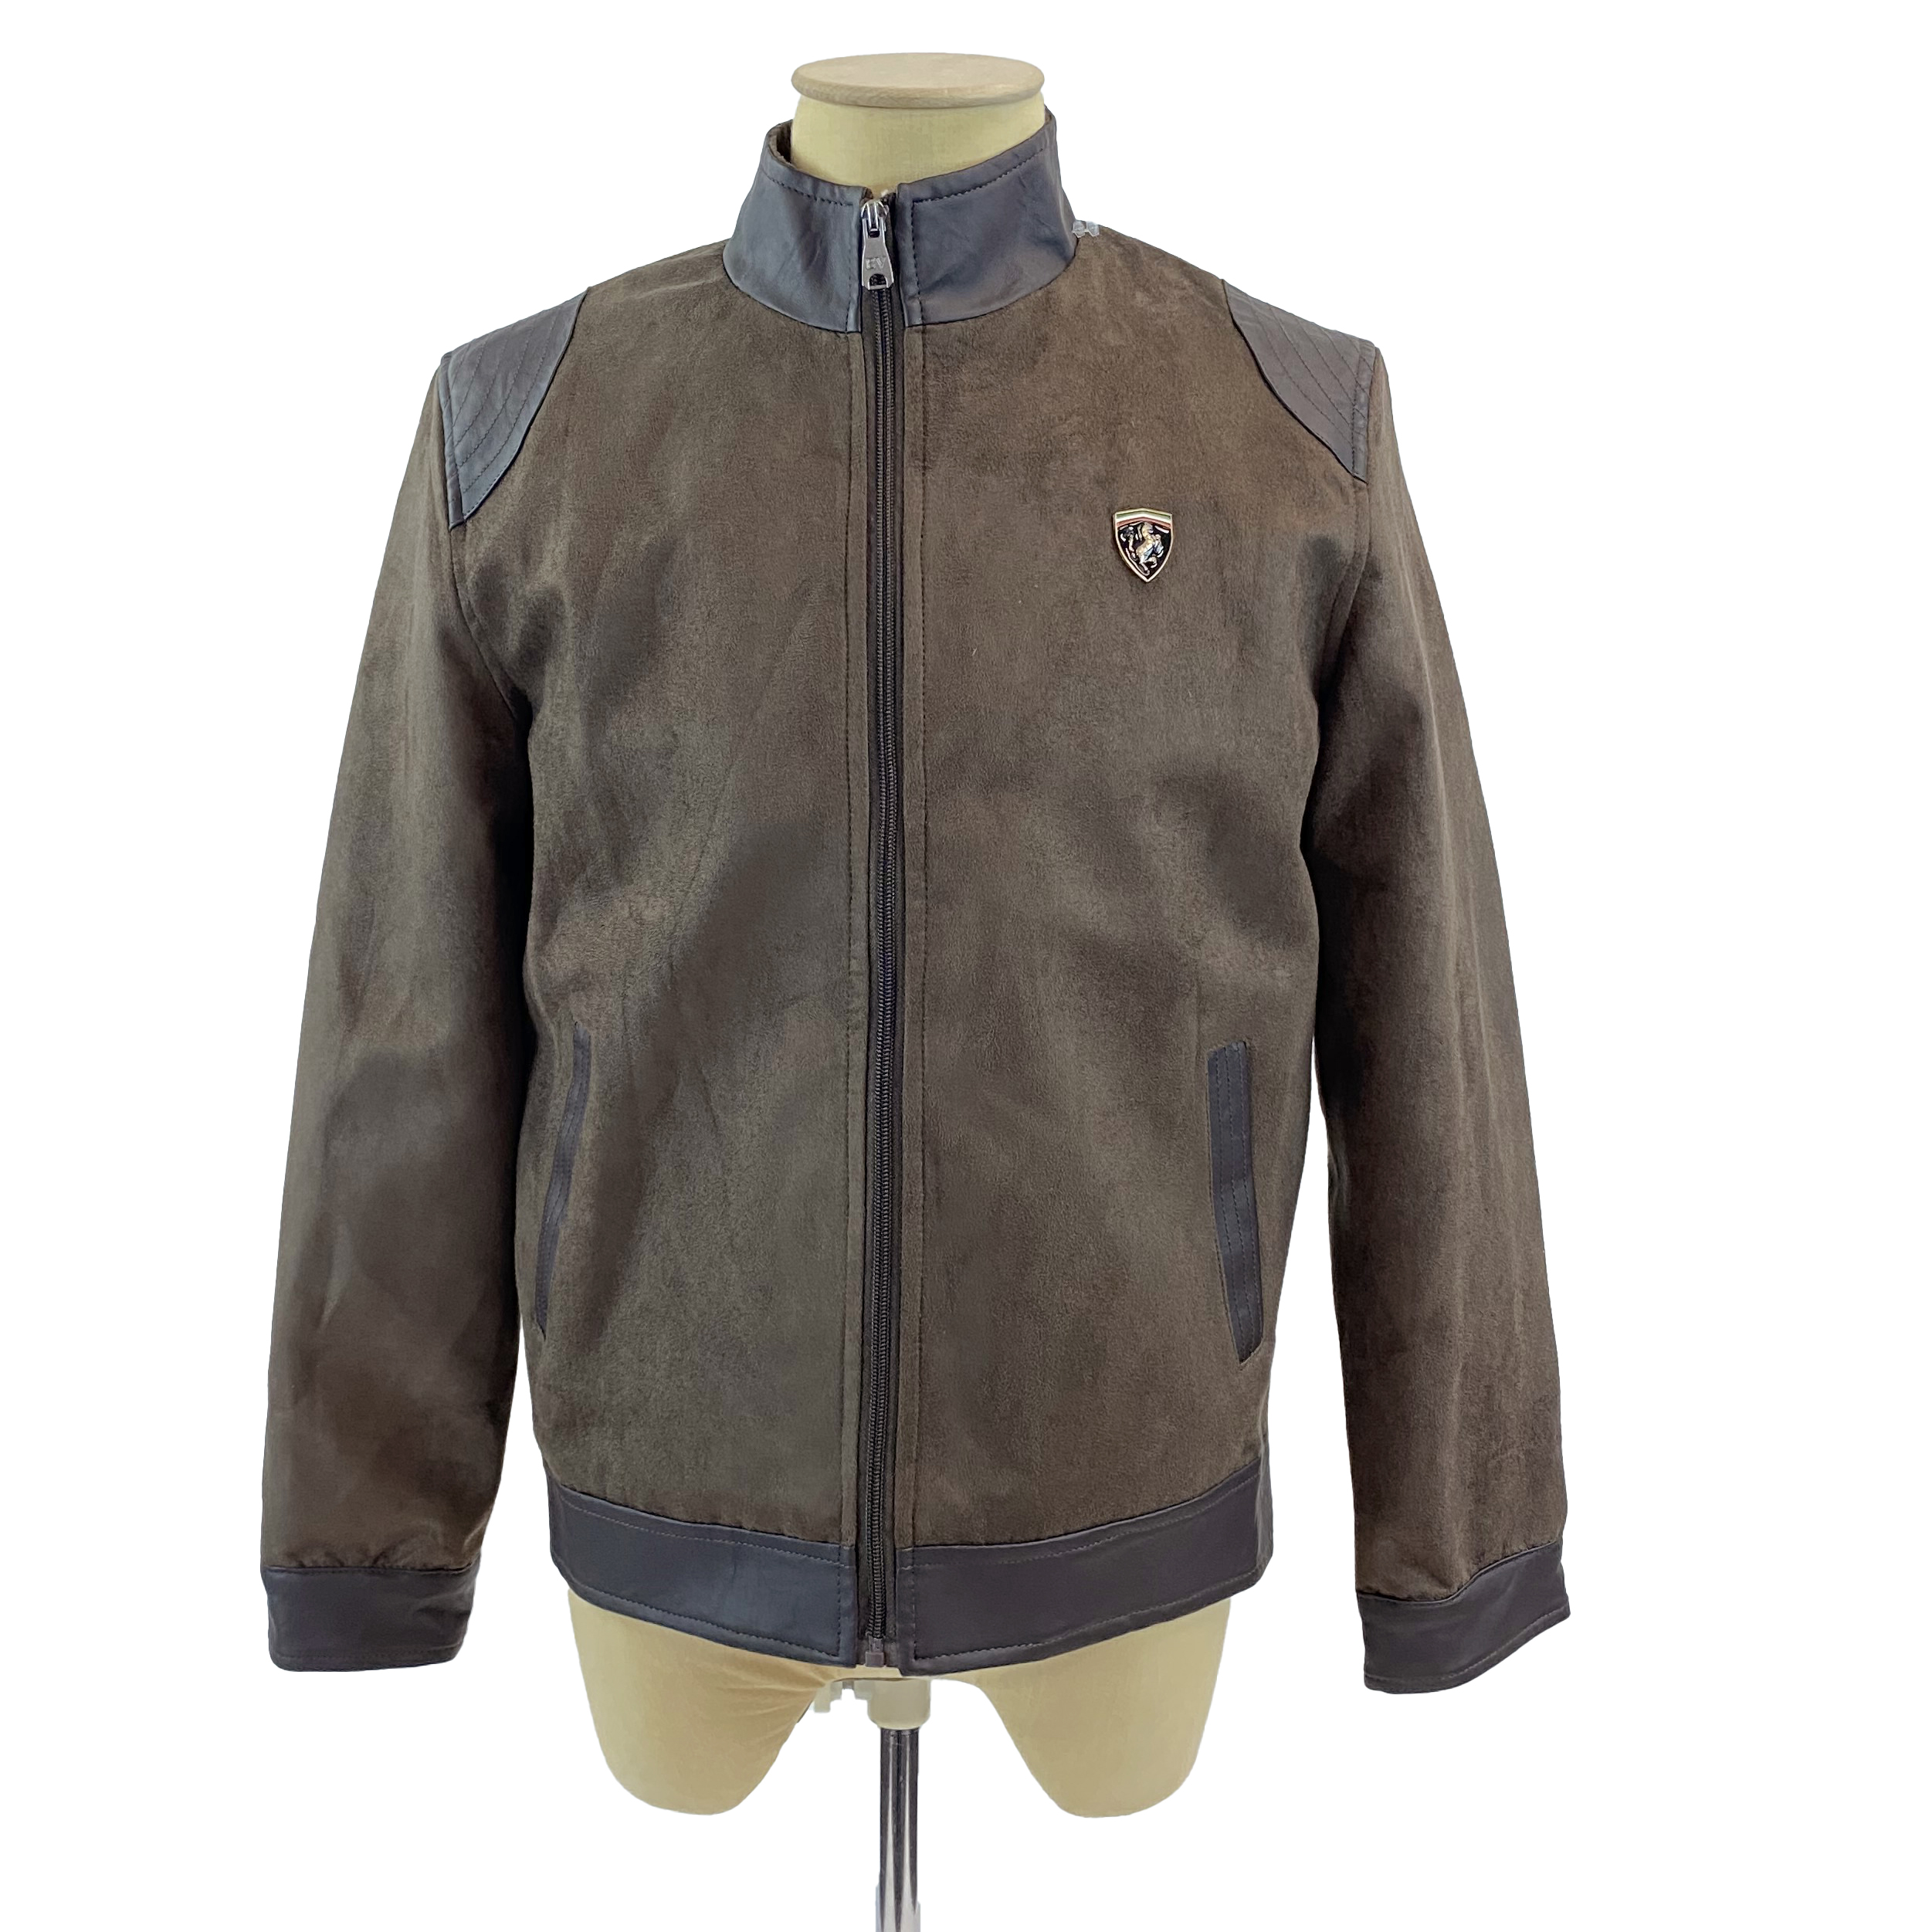 BV Chocolate Brown Suede/Leather Jacket Bomber-style Collar